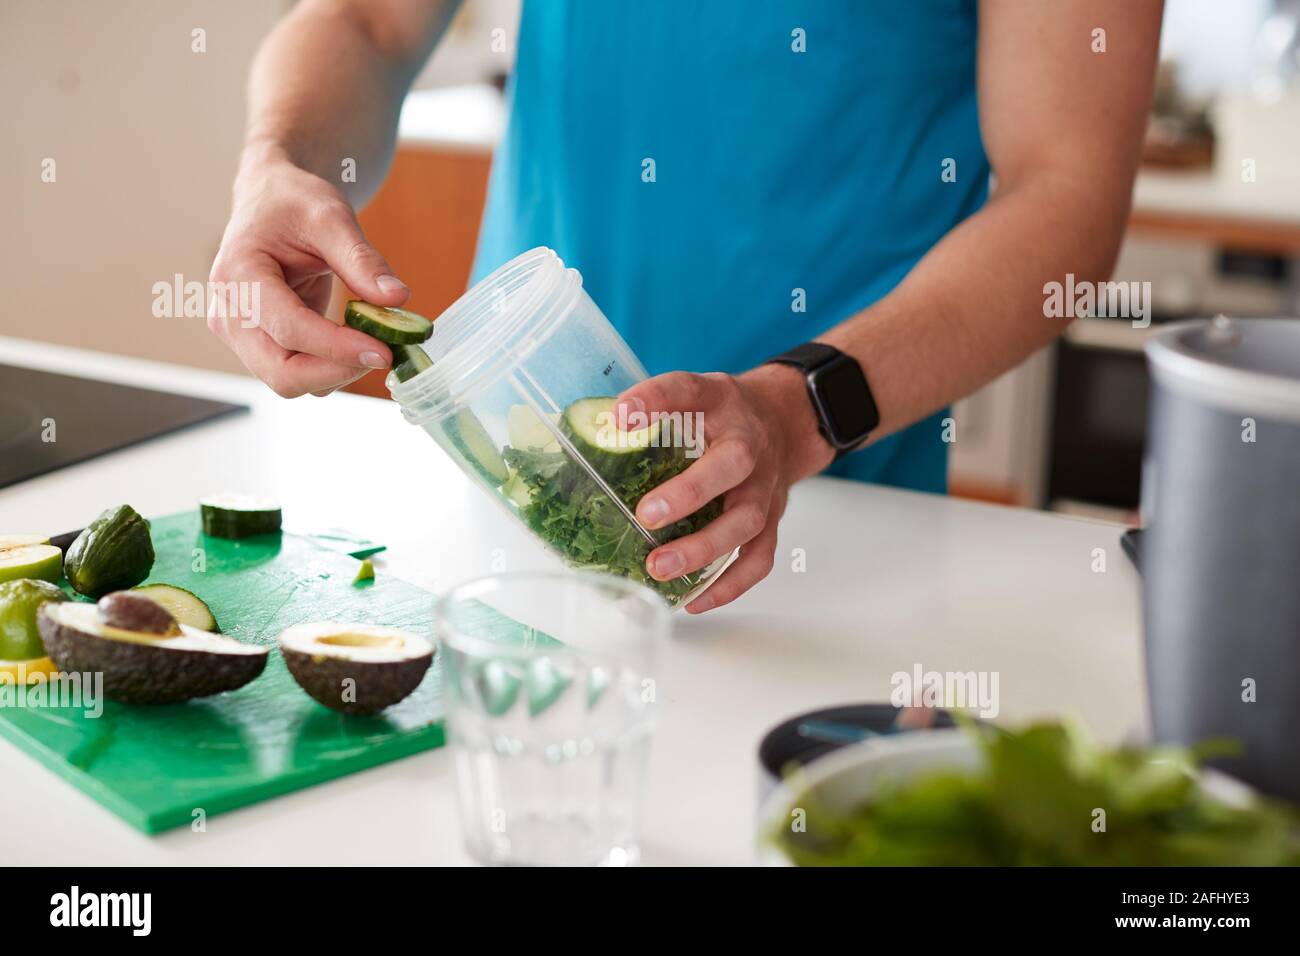 Close Up Of Man Preparing Ingredients For Healthy Juice Drink After Exercise Stock Photo